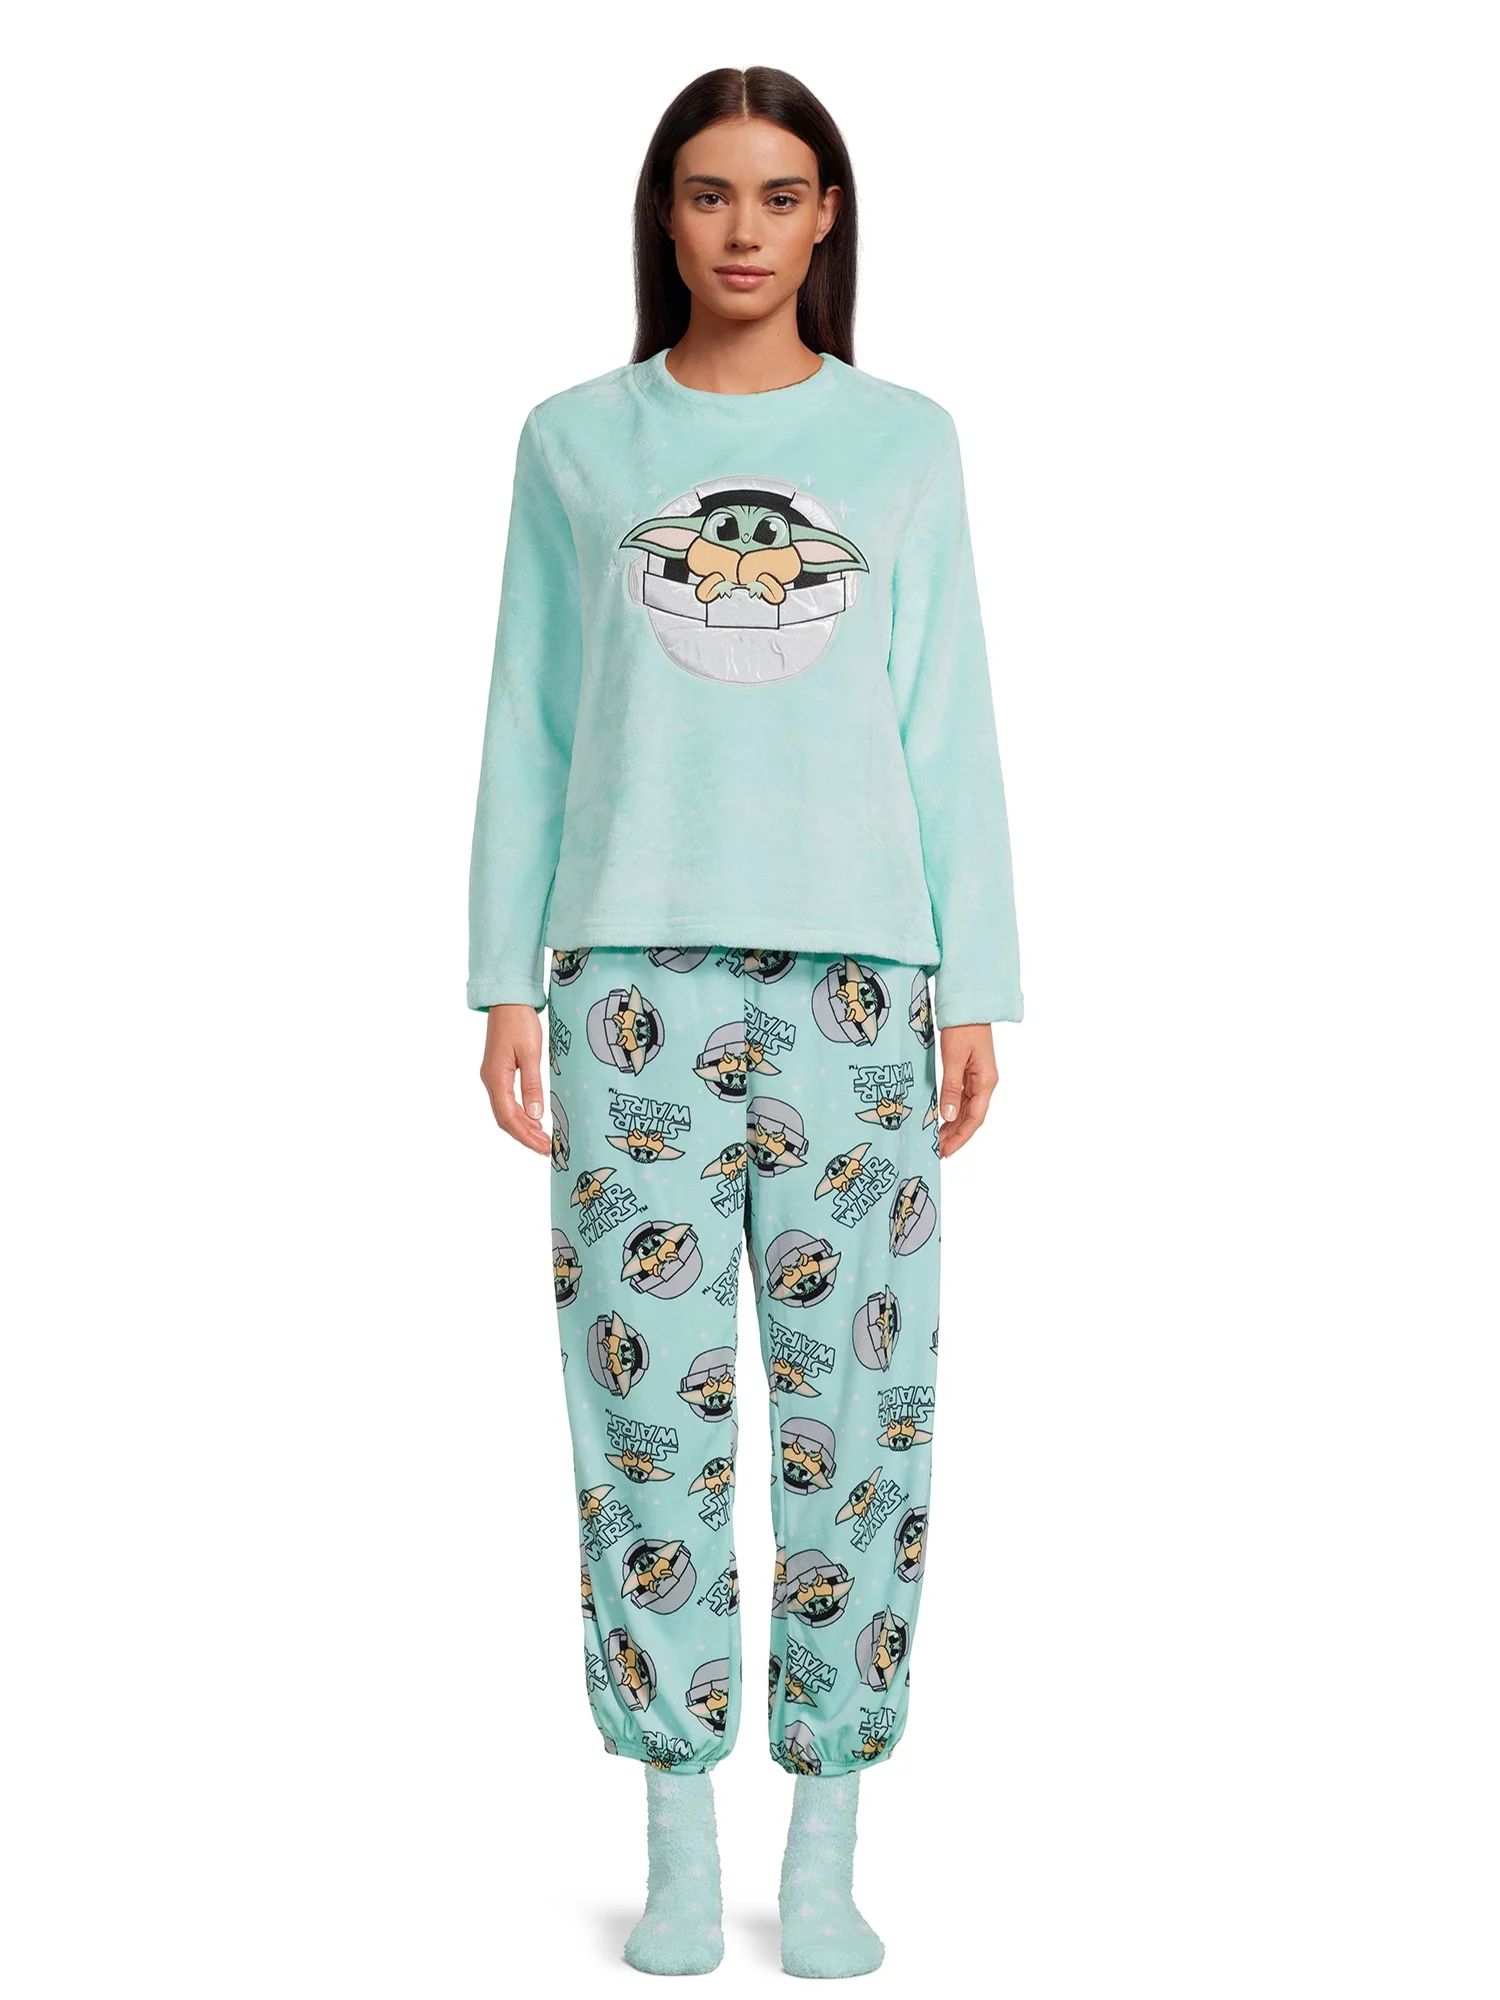 Star Wars Women's The Child Long Sleeve Top, Pants and Socks, 3-Piece Gift Set, Sizes XS-3X | Walmart (US)